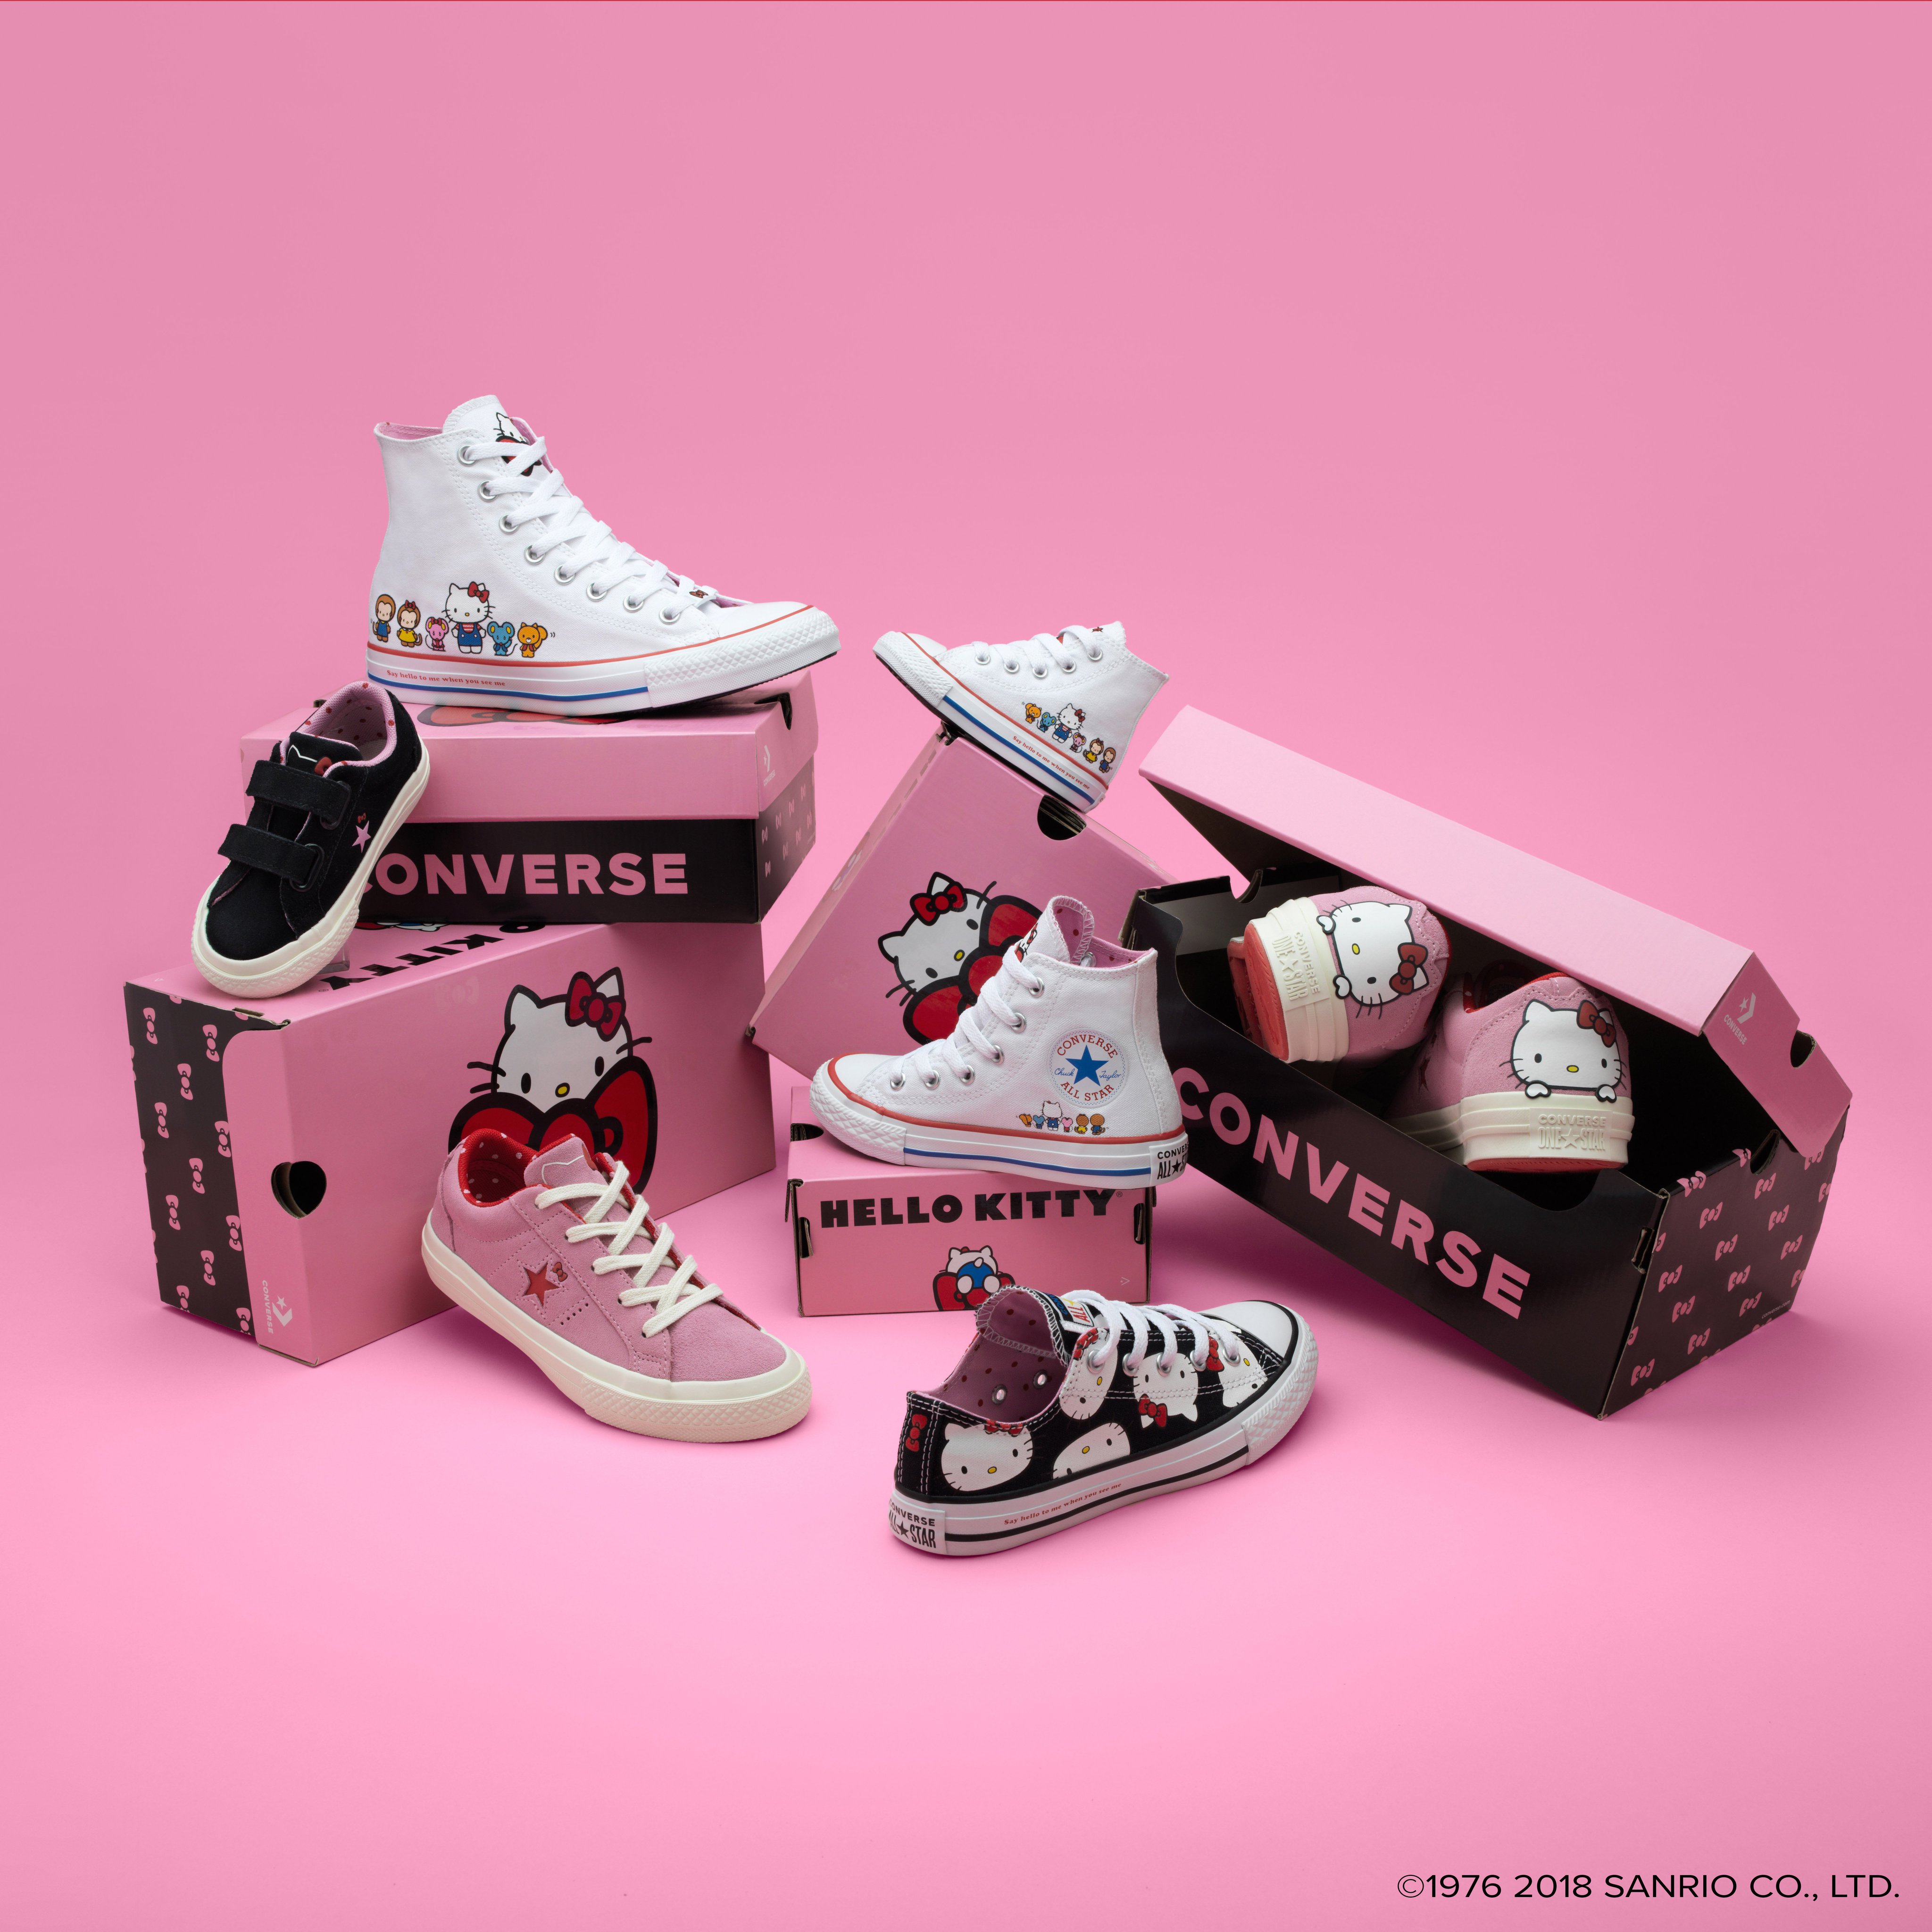 Hello Kitty on Twitter: "@TheTraceyKay @Converse Yes, should be right! https://t.co/O67gkbyH73 has both women's and men's sizing on their site and it looks like that it correct. Hope that helps! https://t.co/4Yf40WwCdg" /